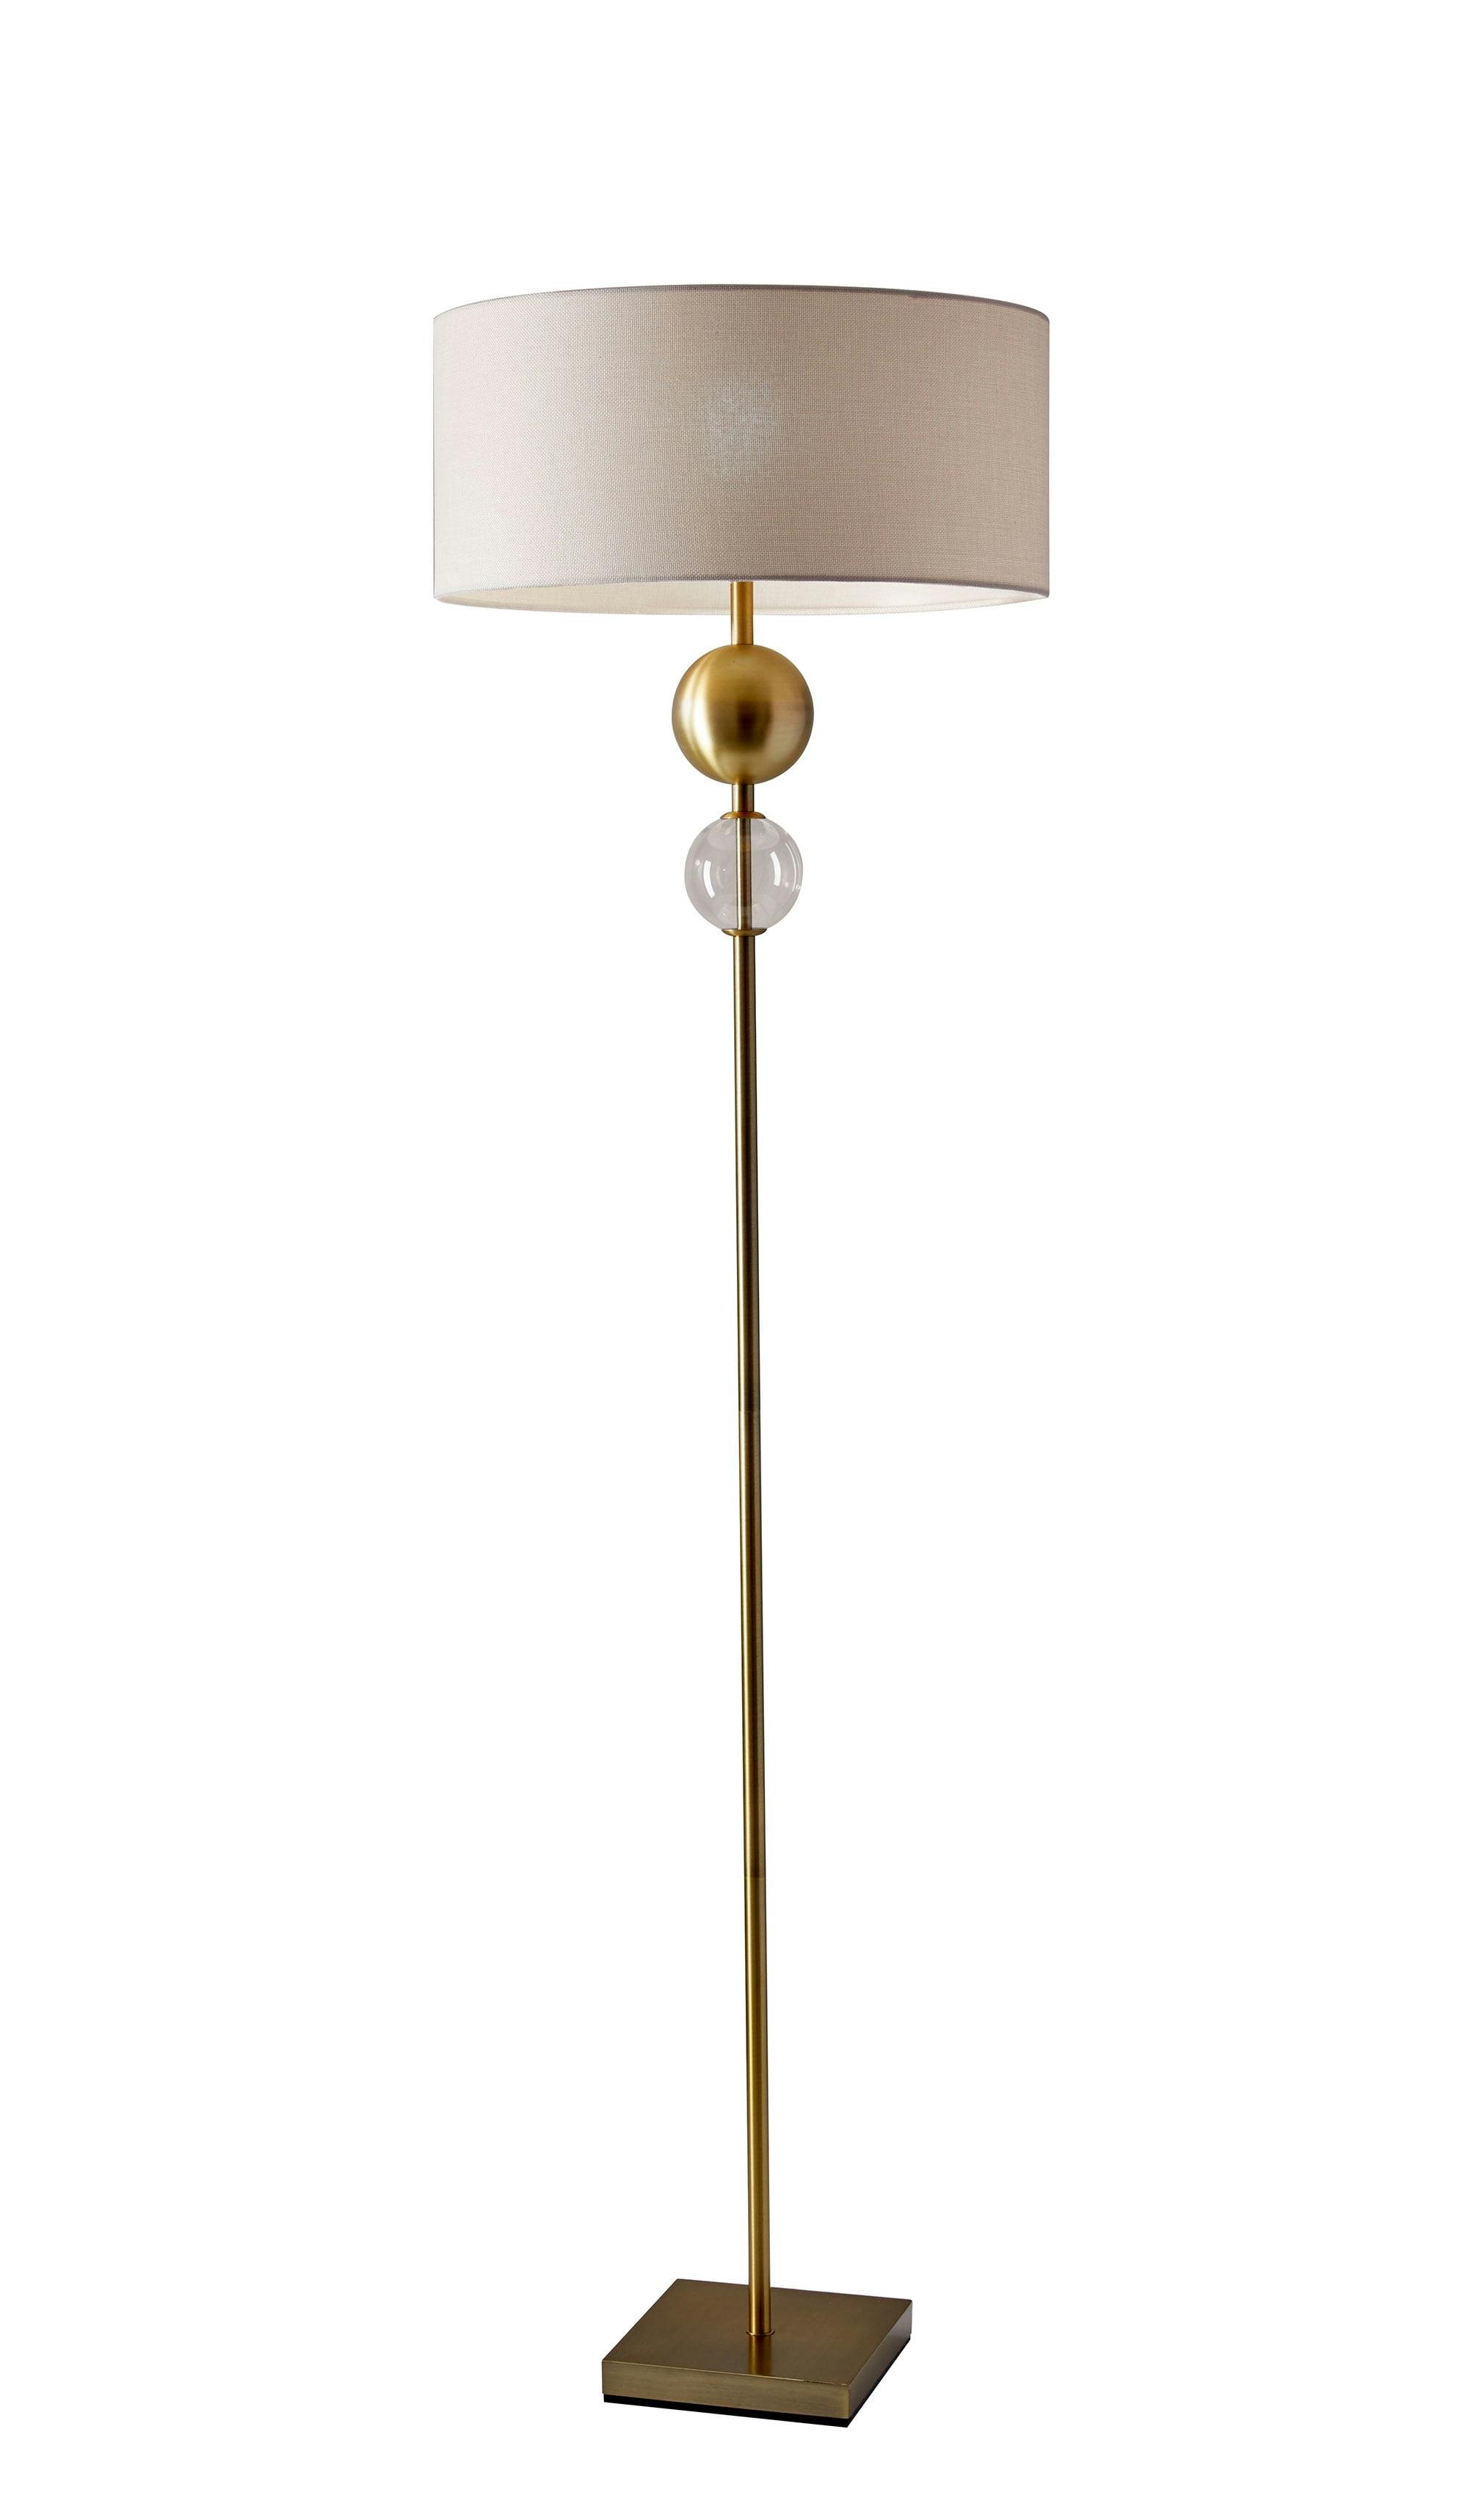 Elegant Antique Brass Floor Lamp with Off-White Fabric Shade